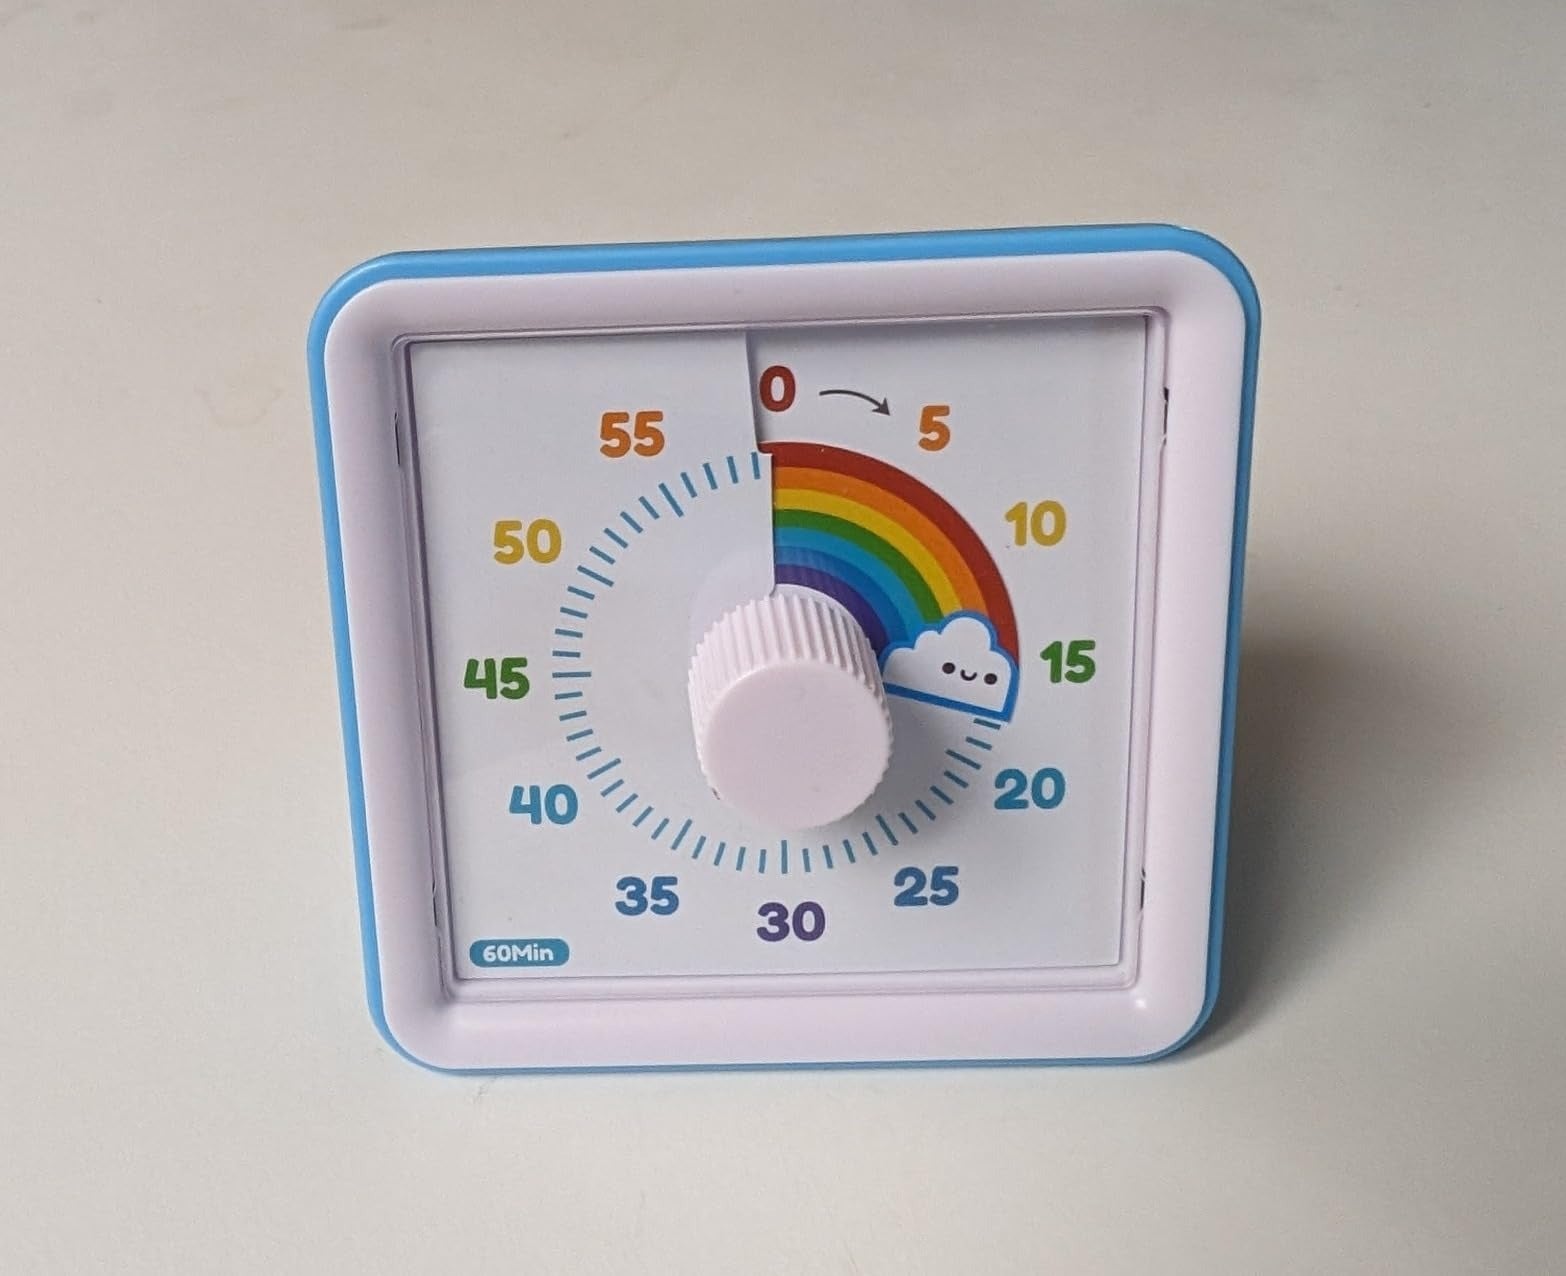 A kitchen timer with a rainbow and cloud design, set to zero, against a plain background